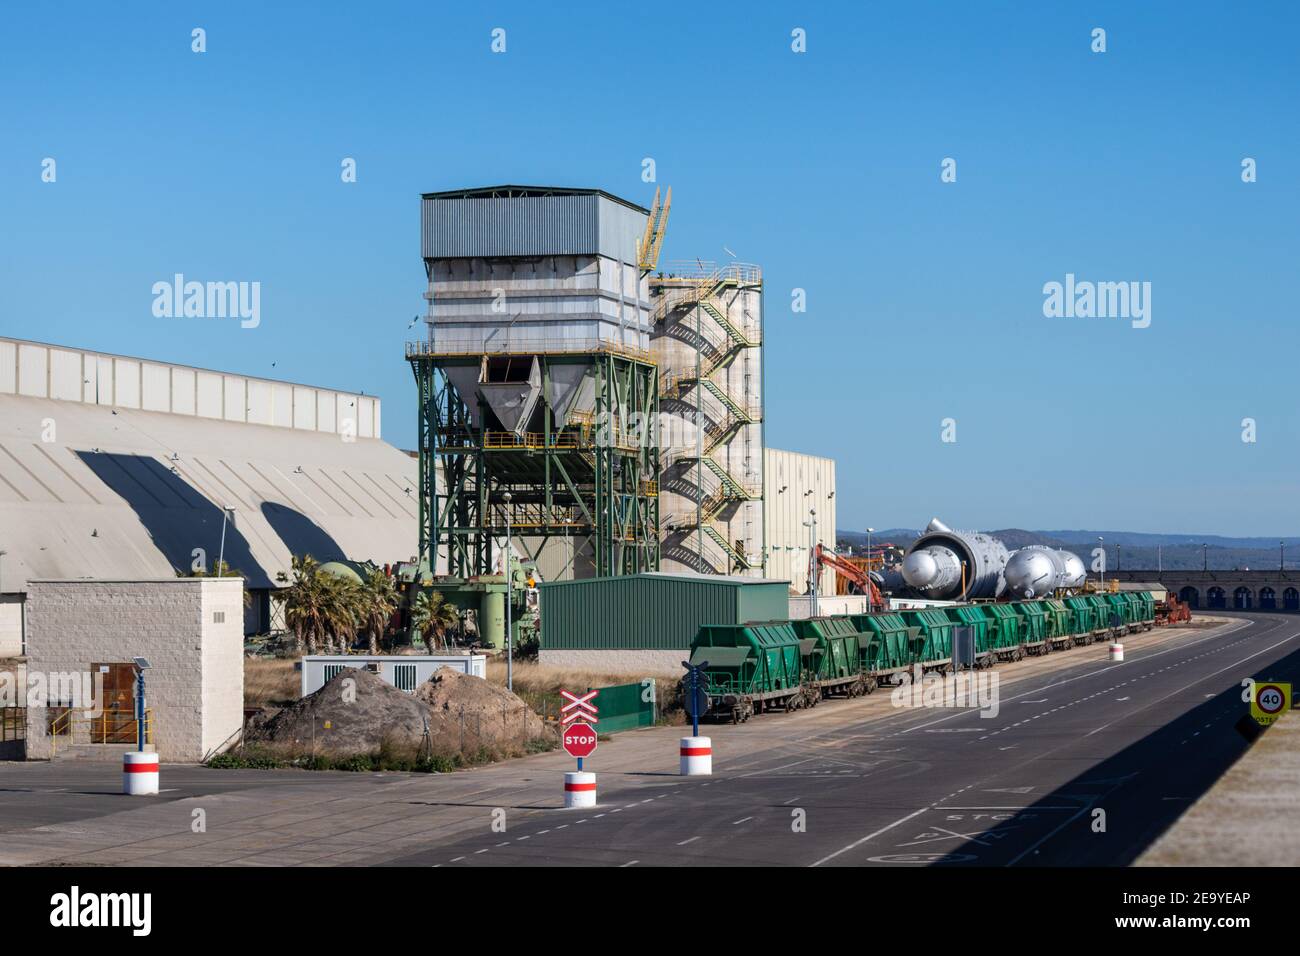 Logistics at industrial port, wagon train used for transportation, load and unload ships arriving to port. Tarragona, Catalonia, Spain Stock Photo